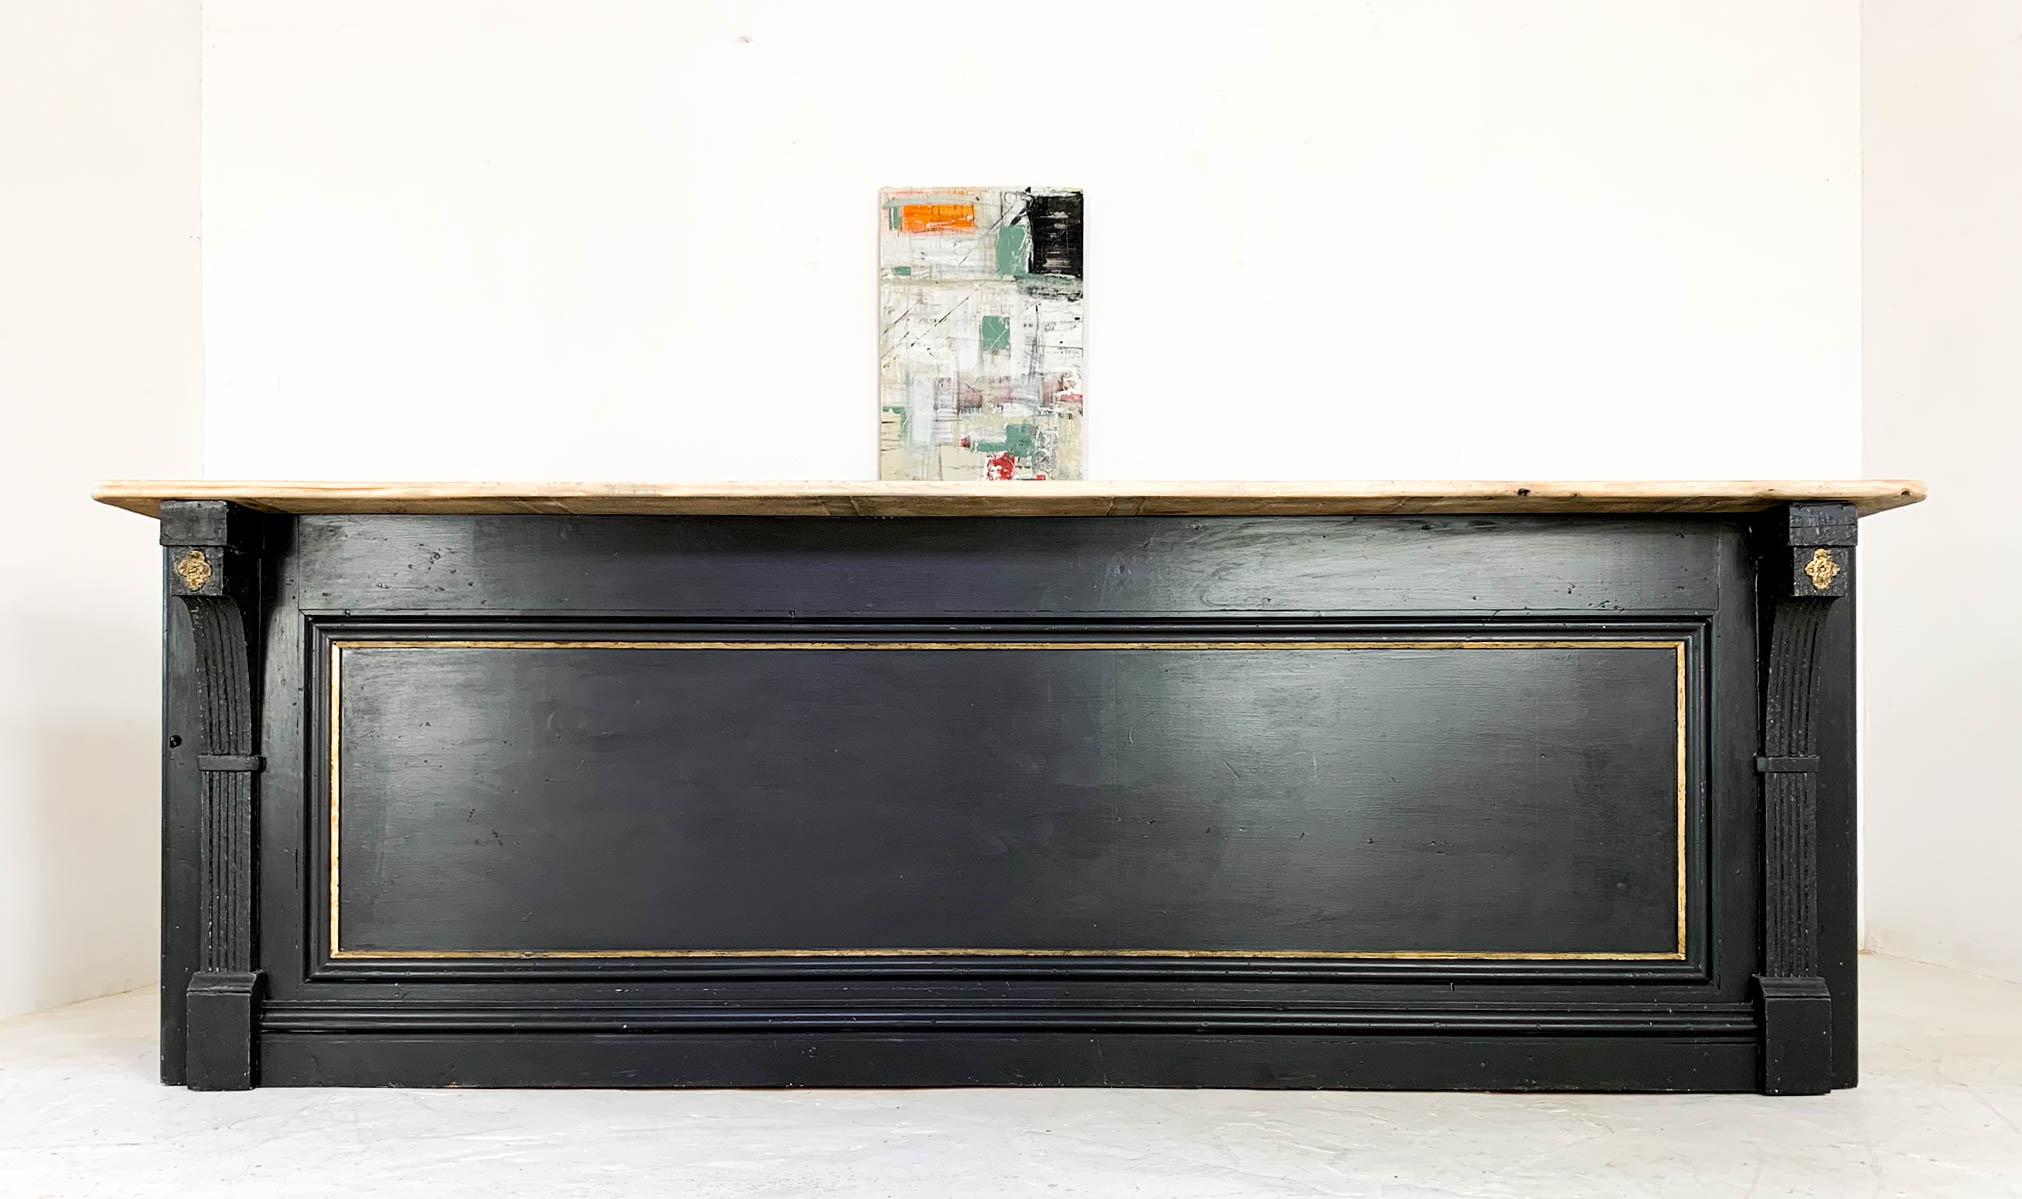 Stunning pine shop counter which has been fully restored to bring it back to it's former glory. The paneled front features decorative corbels at either end and gold paint that highlights and details the moldings. The top is a later addition made